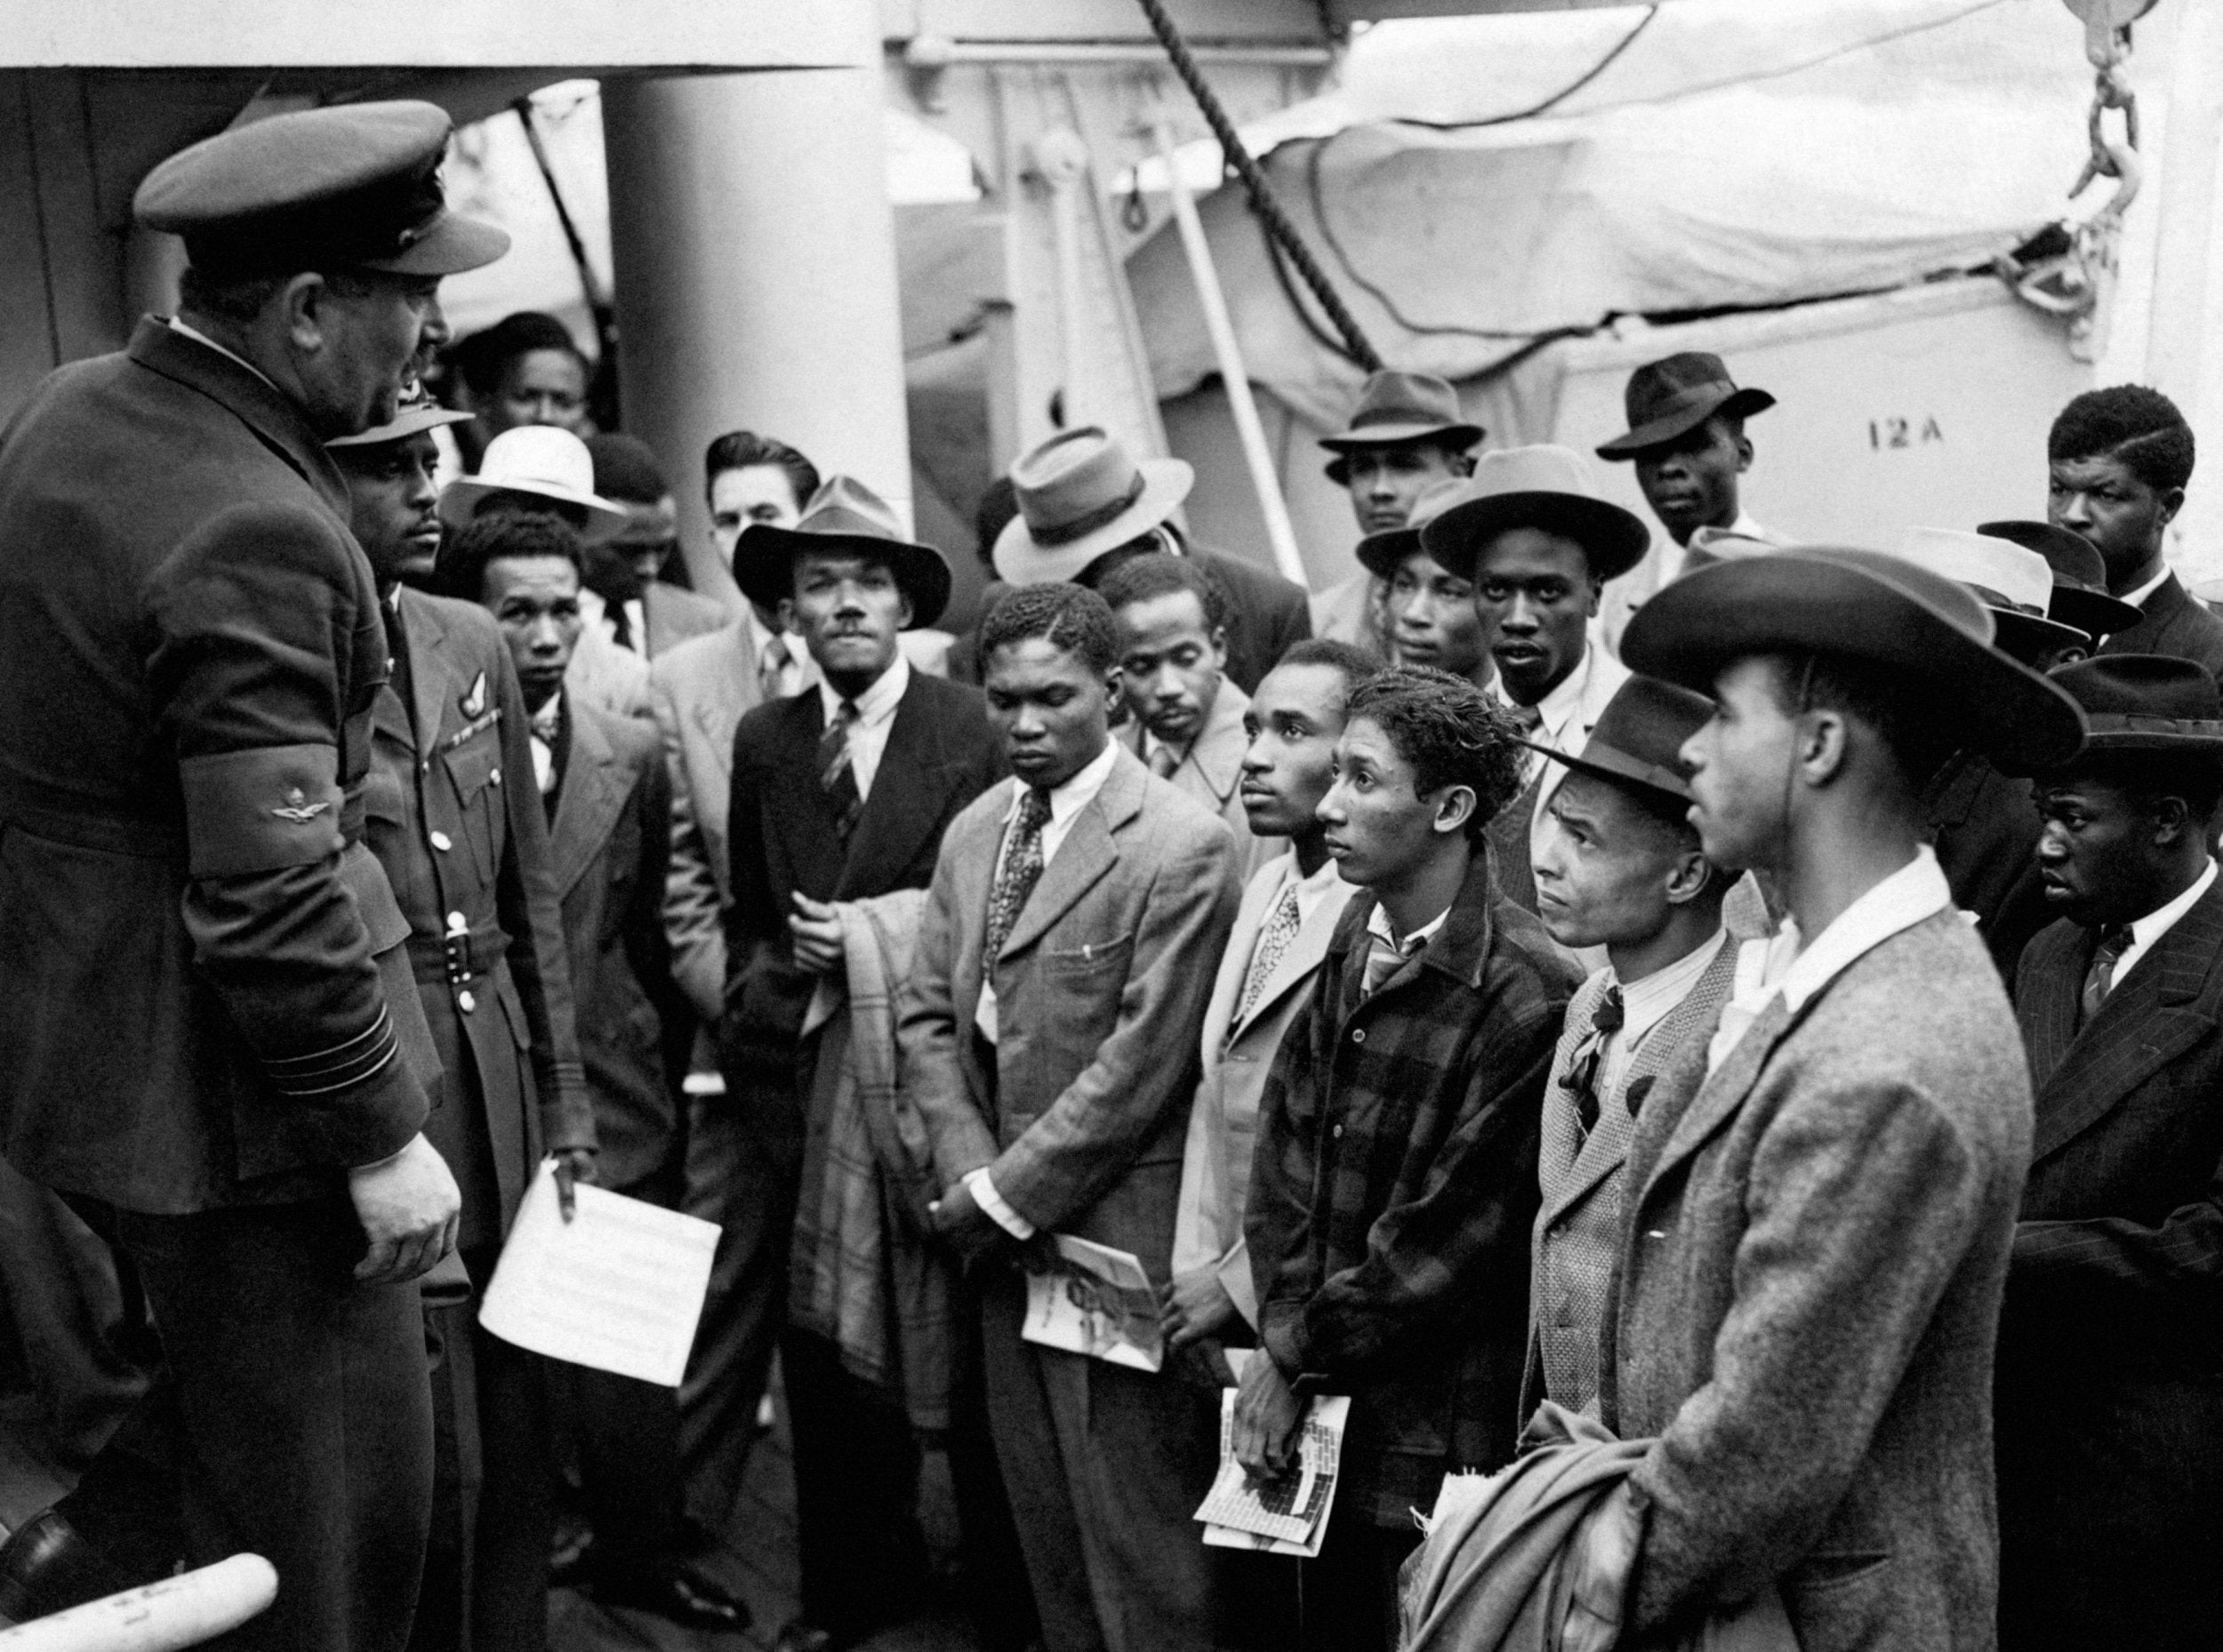 Jamaican immigrants welcomed by RAF officials after the ex-troopship HMT 'Empire Windrush' landed them at Tilbury in 1948